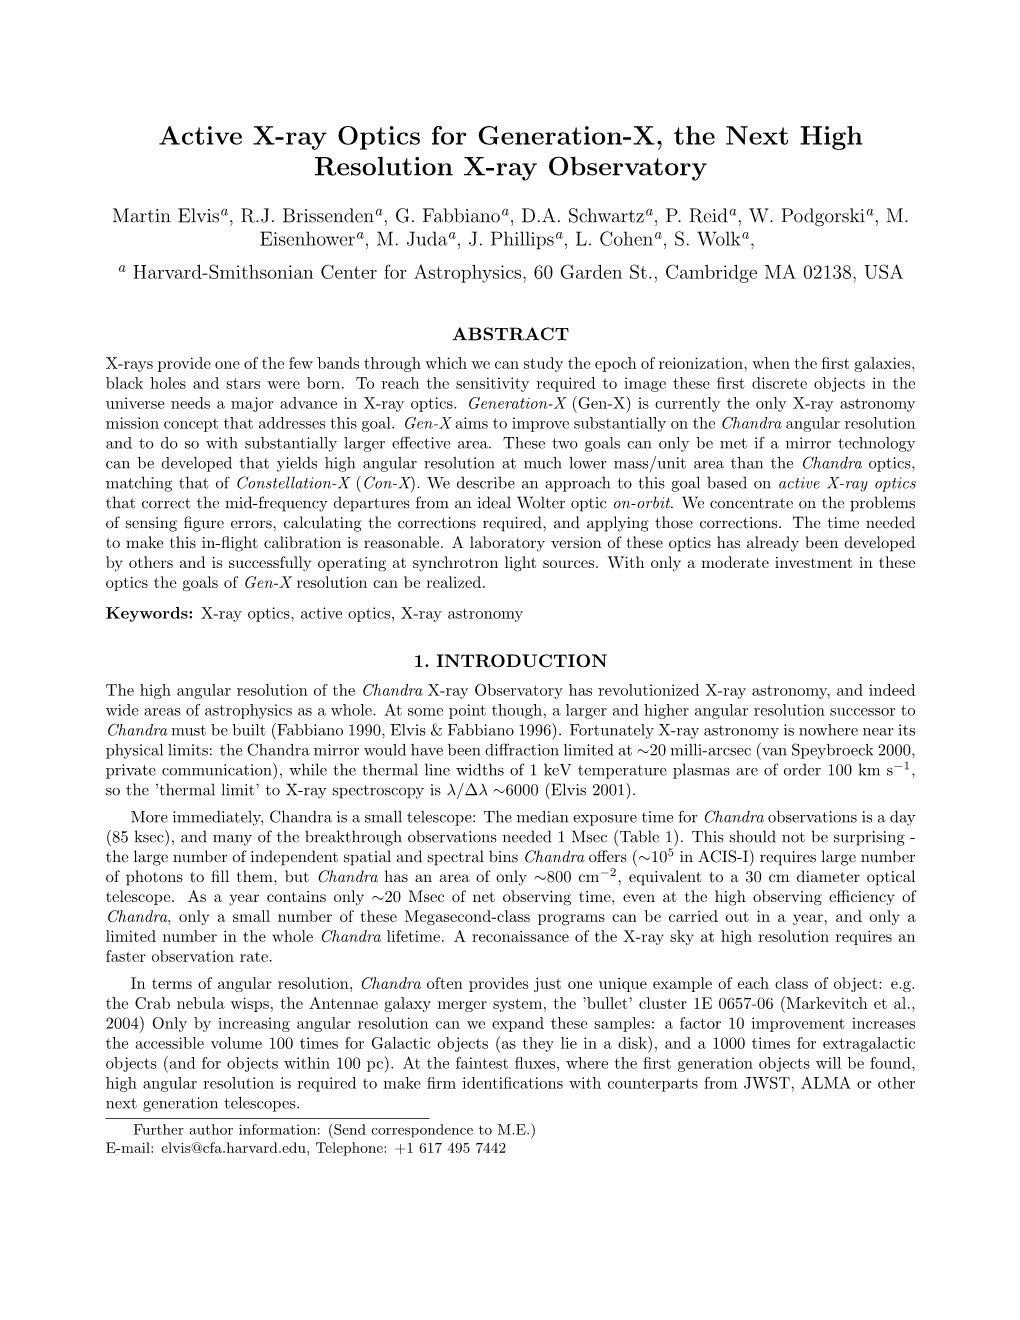 Active X-Ray Optics for Generation-X, the Next High Resolution X-Ray Observatory